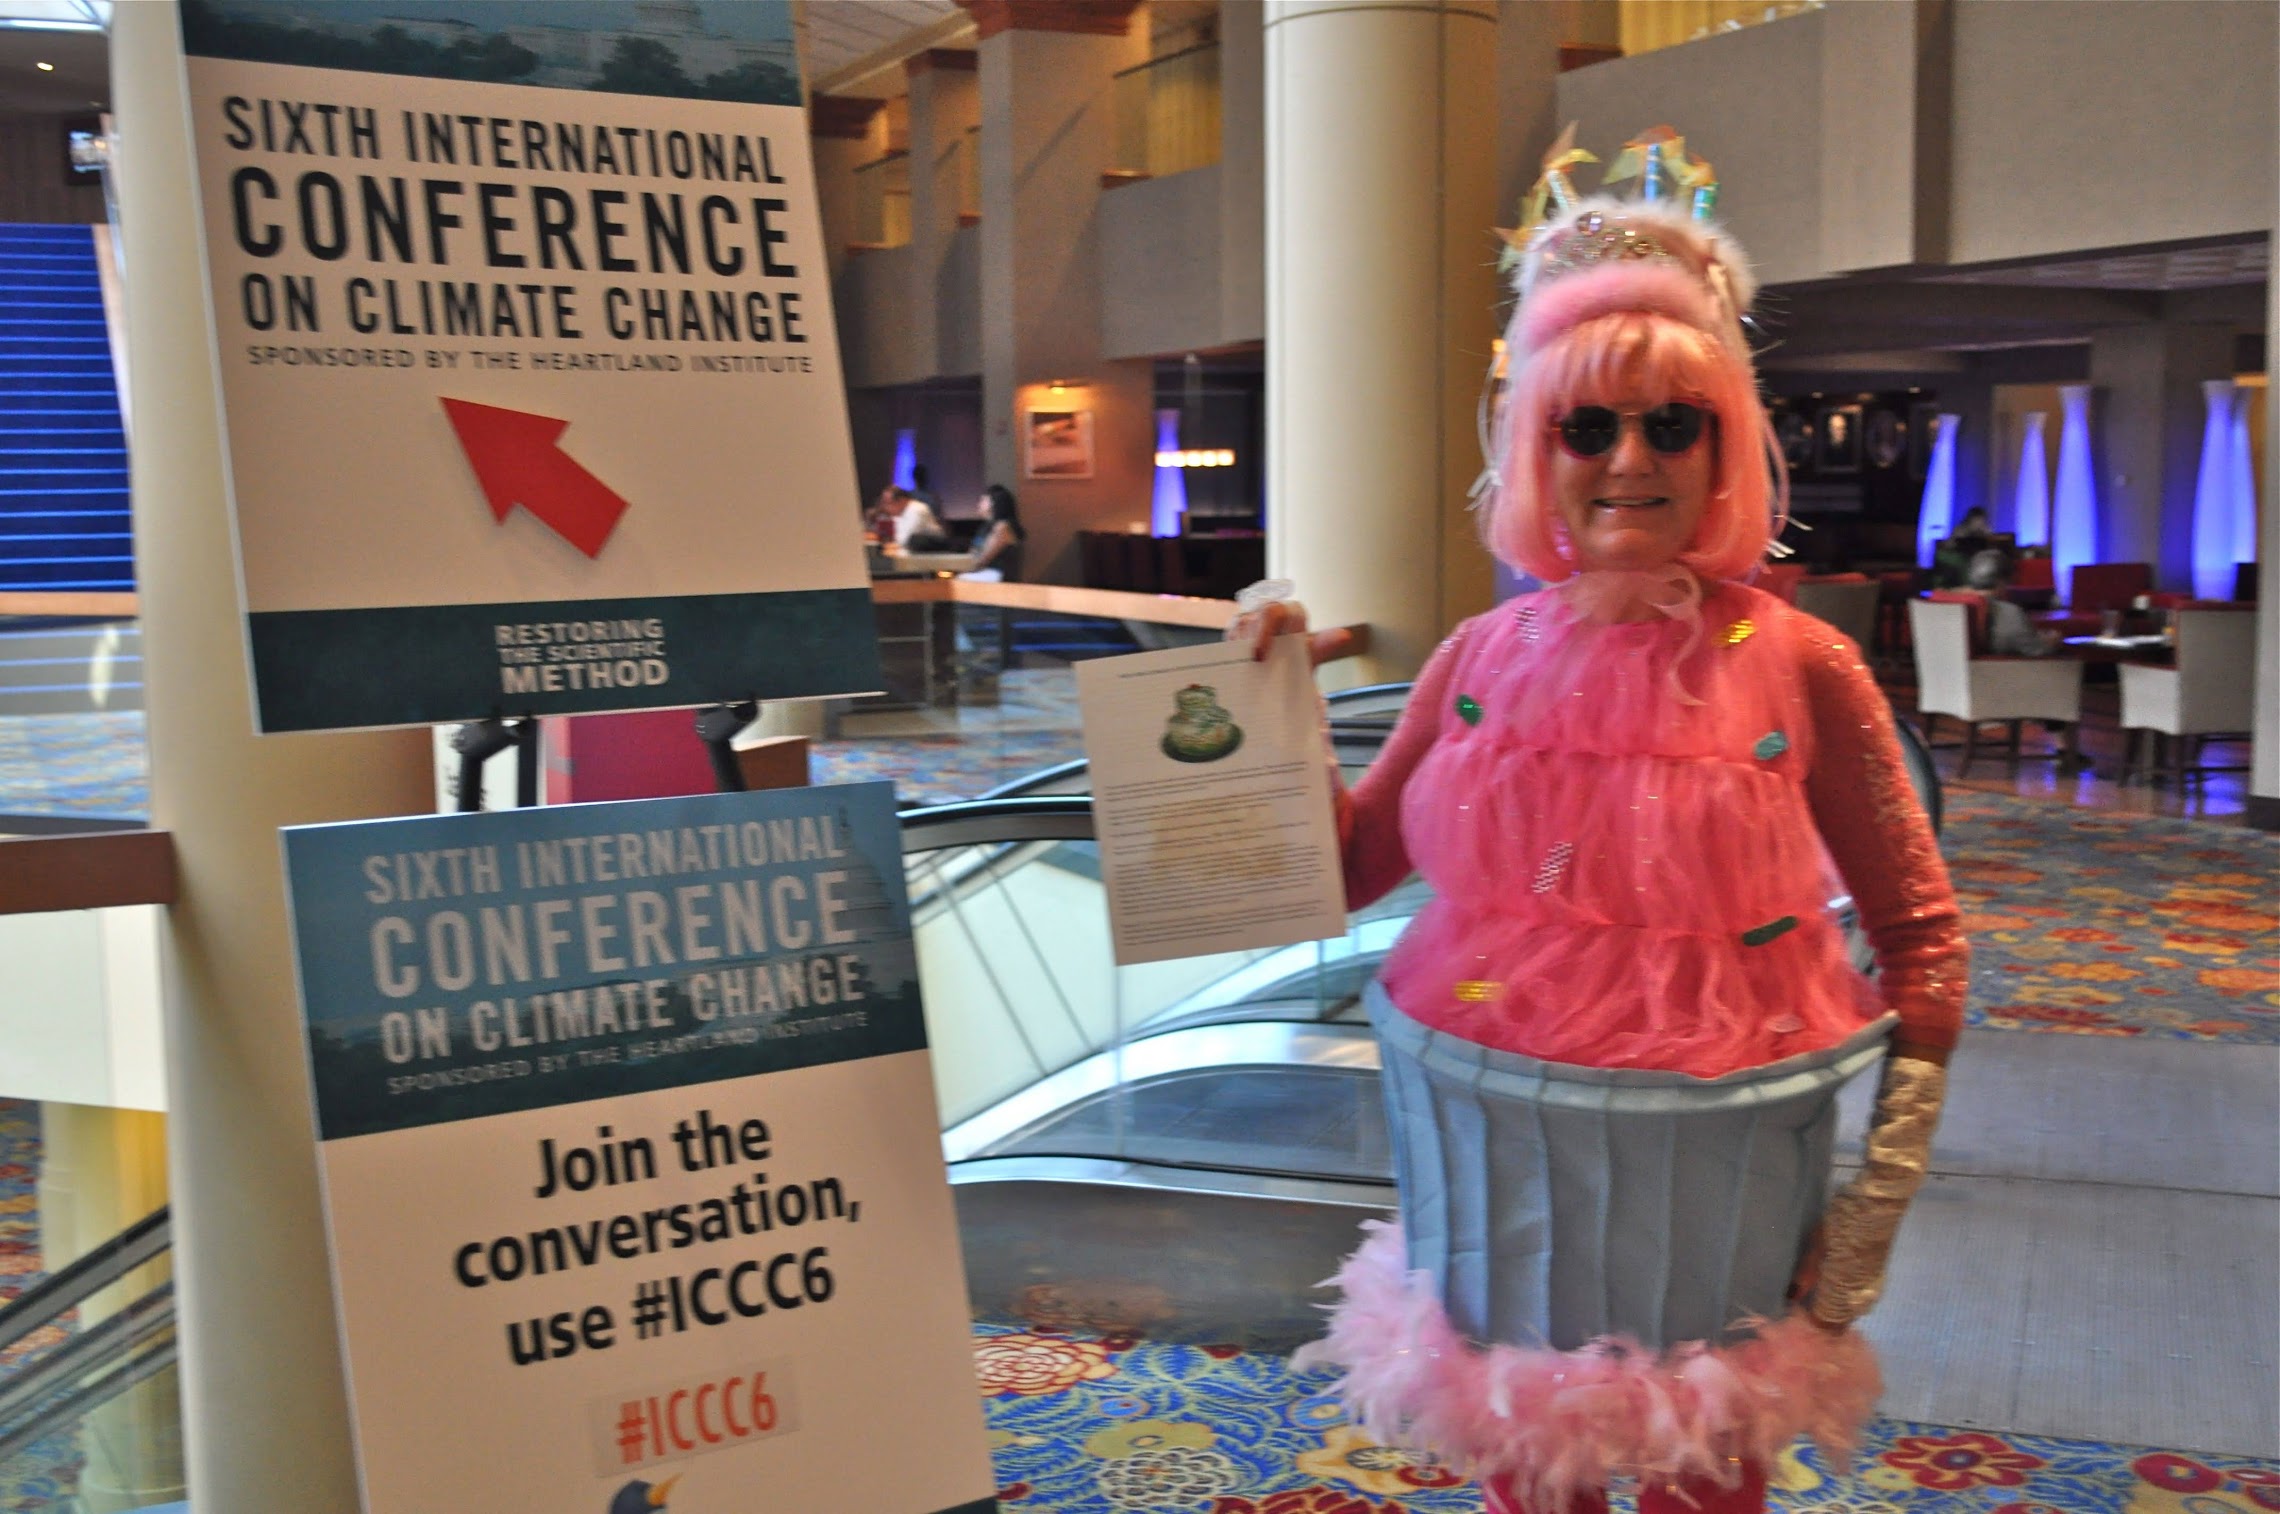 Gail Zawacki in cupcake costume protesting at the Heartland Institute’s sixth international climate denial conference, 30 June 2011. She designed the cupcake costume “to demonstrate in a non-threatening, cheerful image the simple verity that ‘climate change is baked in the cake’”. Photo: Gail Zawacki / Wit’s End